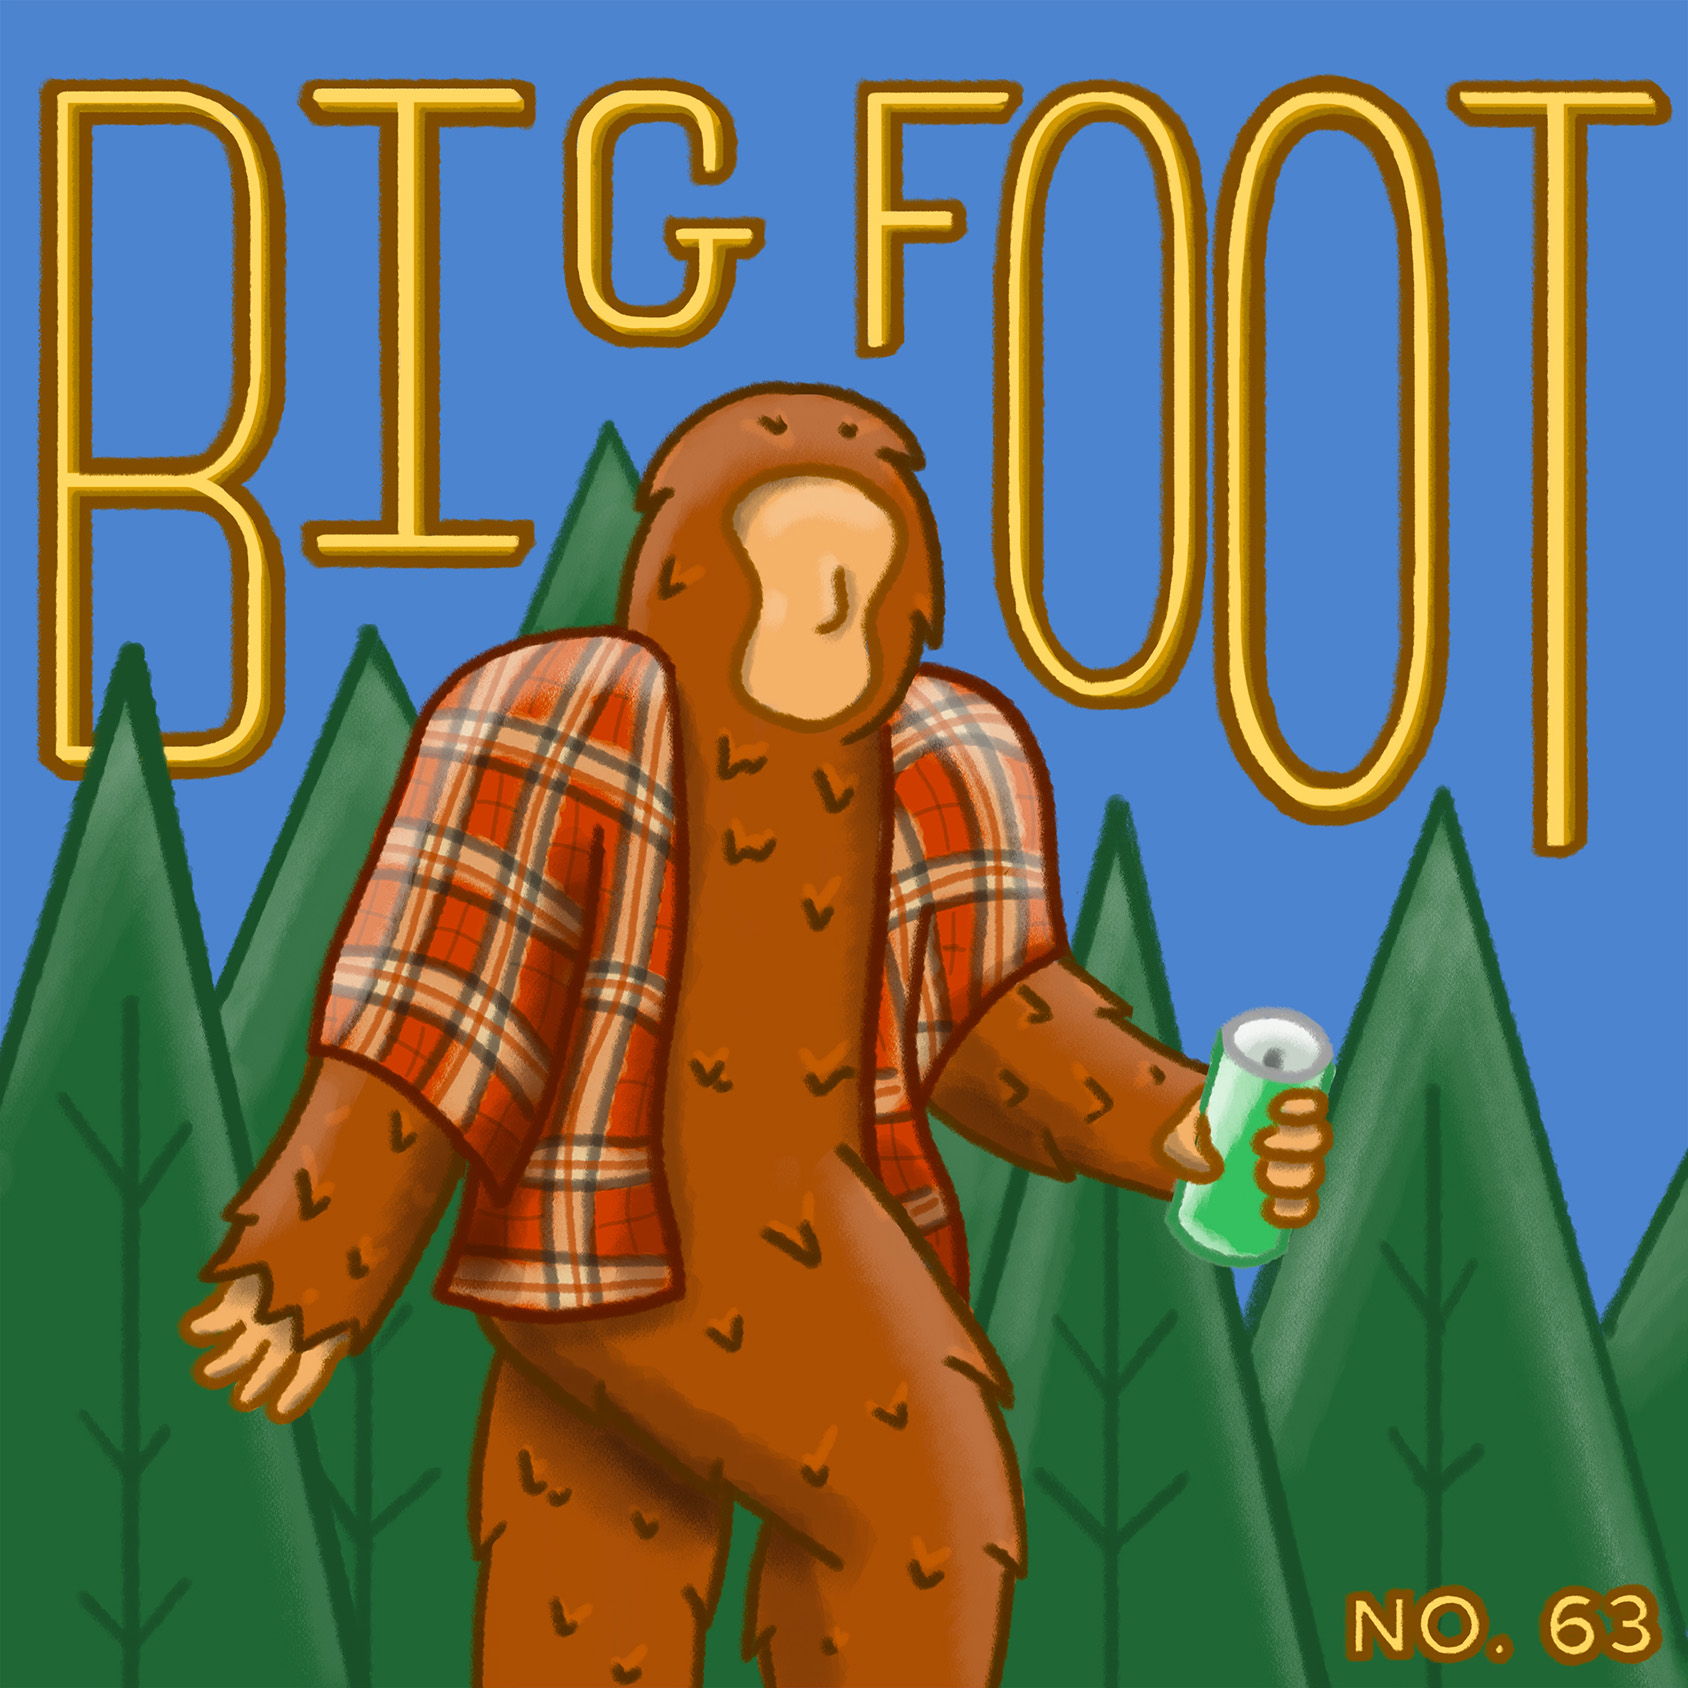 Illustration of bigfoot wearing a flannel and holding a beer can. The title of the podcast episode 'Bigfoot' is written in the background and the episode number '63' is in the bottom right.